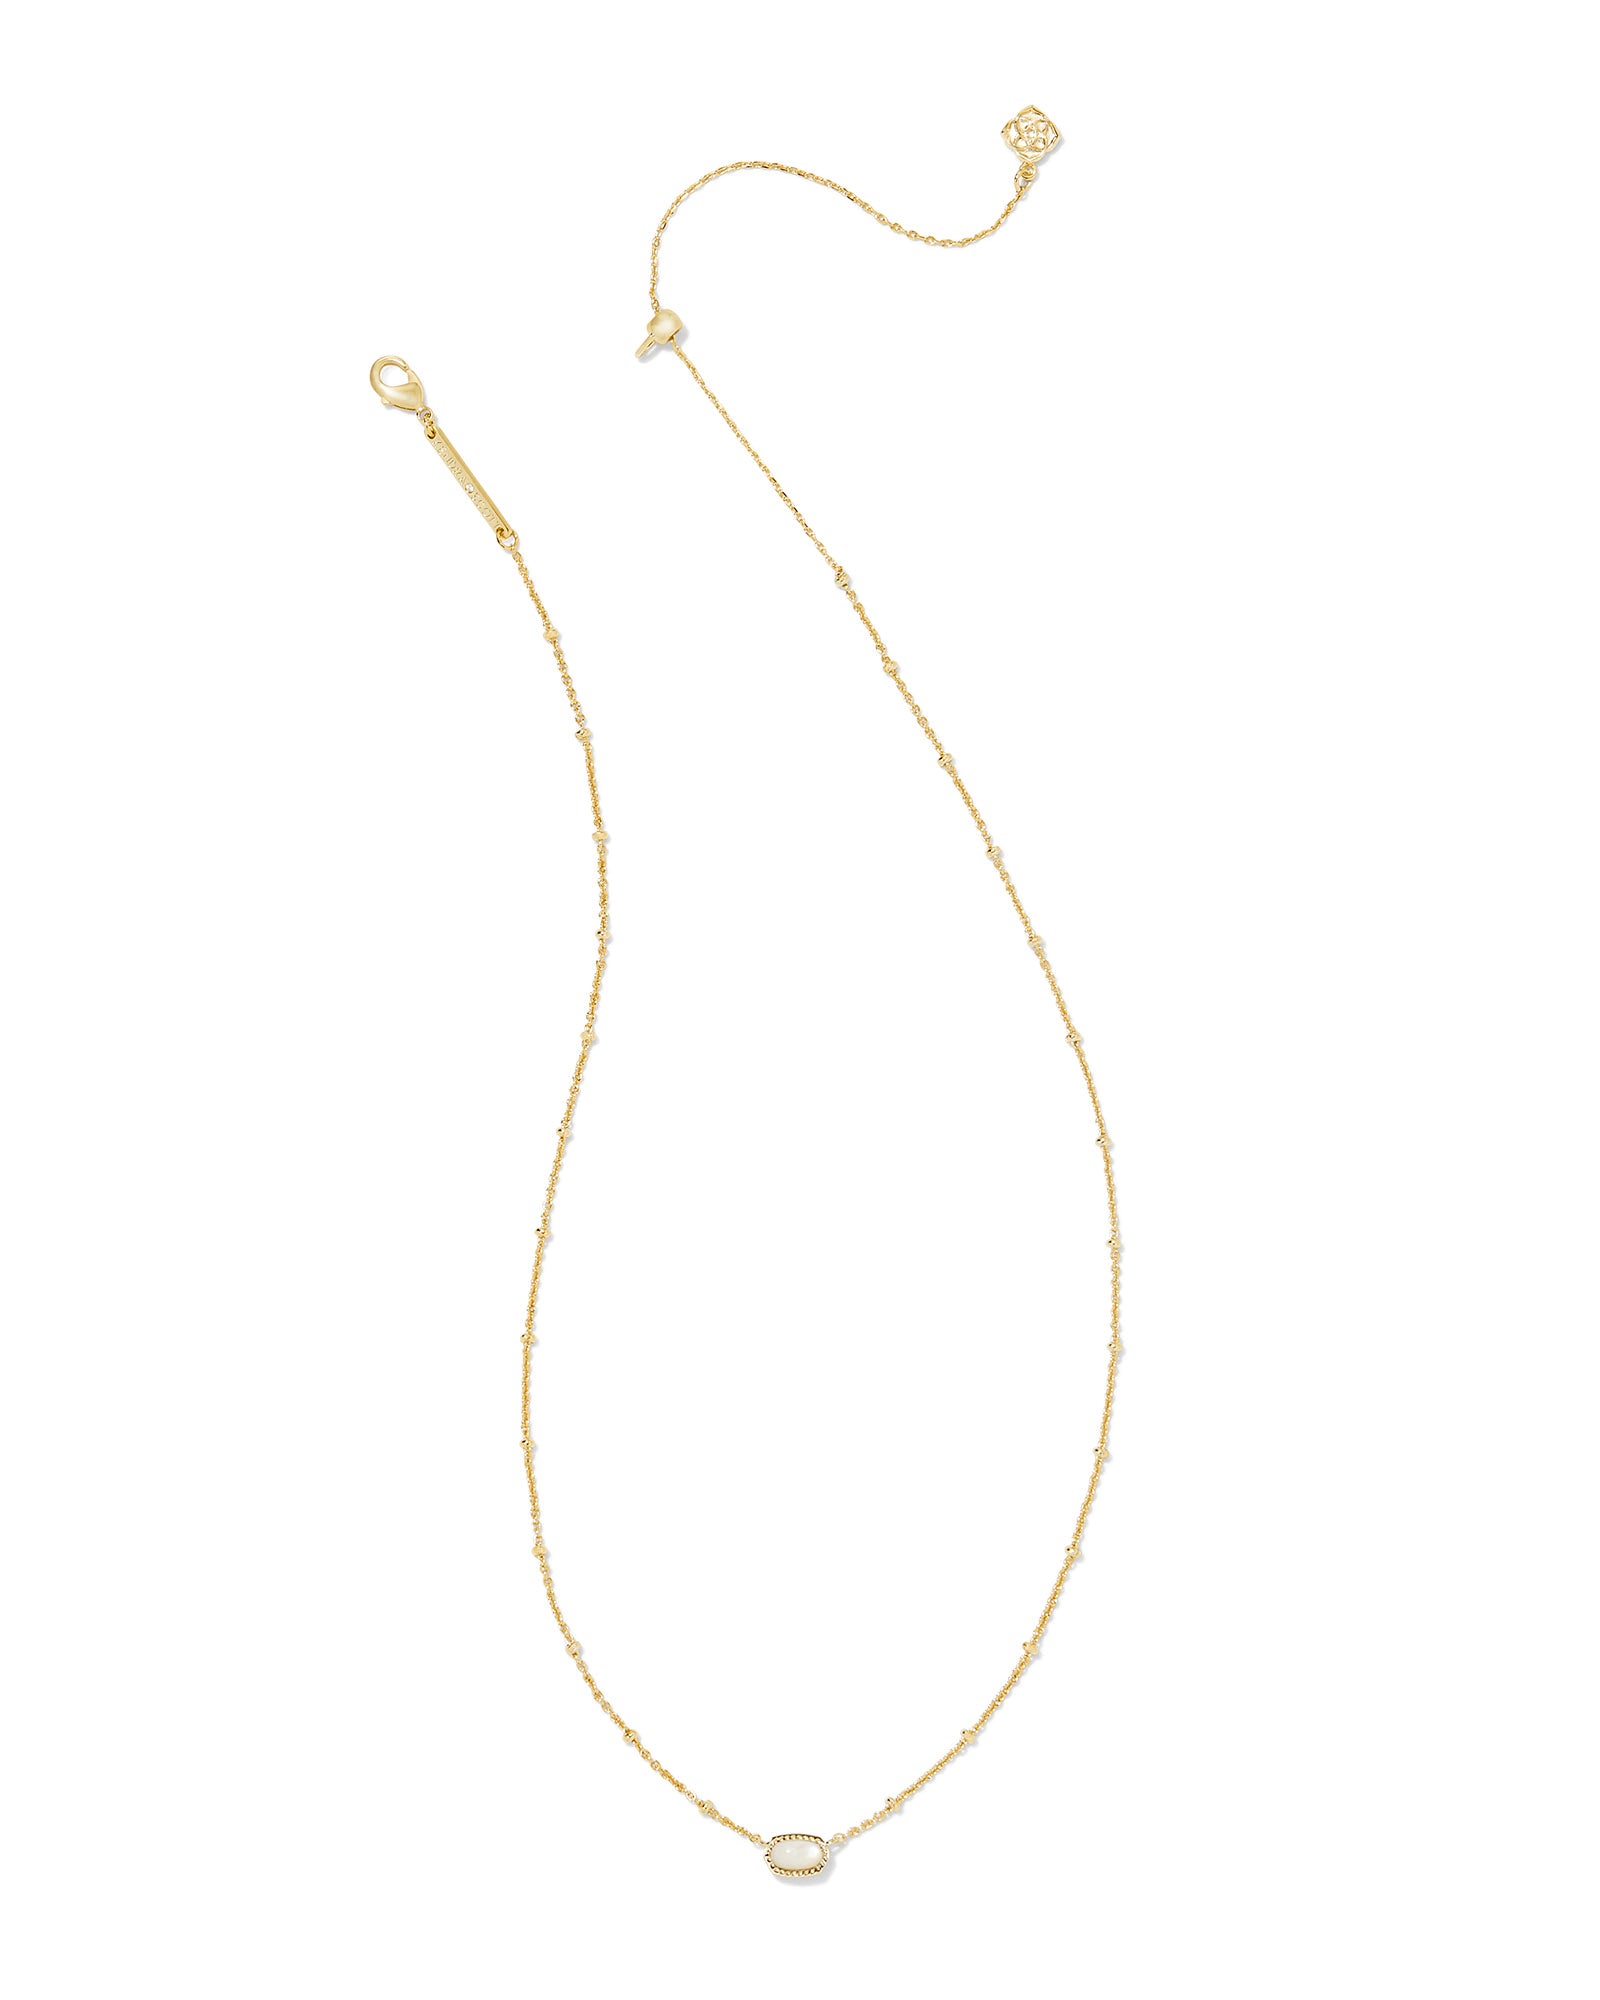 Kendra Scott |  Mini Elisa Gold Satellite Short Pendant Necklace in Ivory Mother of Pearl - Giddy Up Glamour Boutique